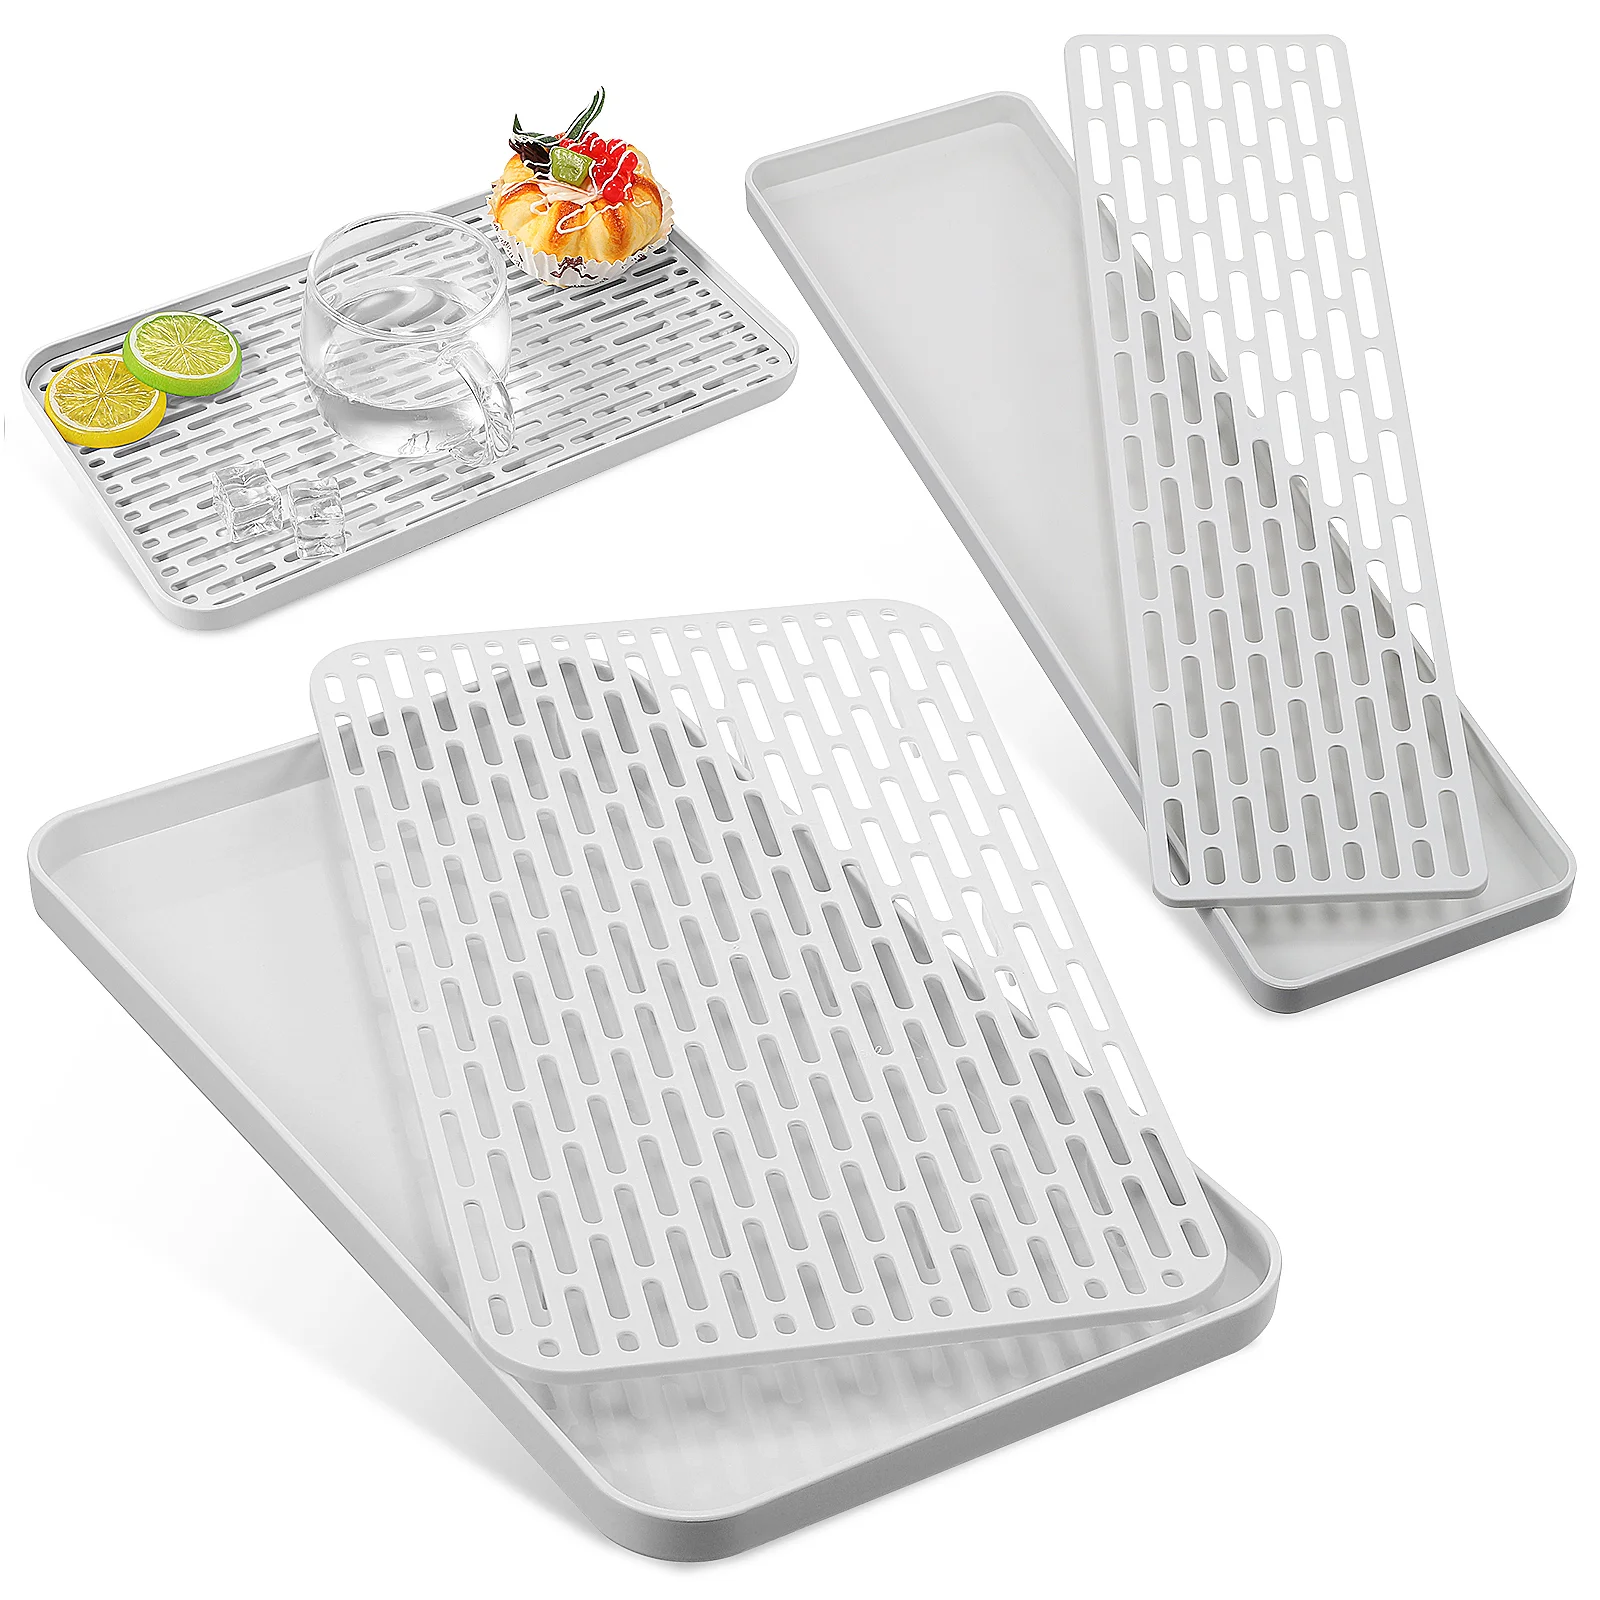 

2Pcs Drainer Trays Double-layer Large Water Storage Capacity Dish Drain Board Drying Pad for Kitchen Counter